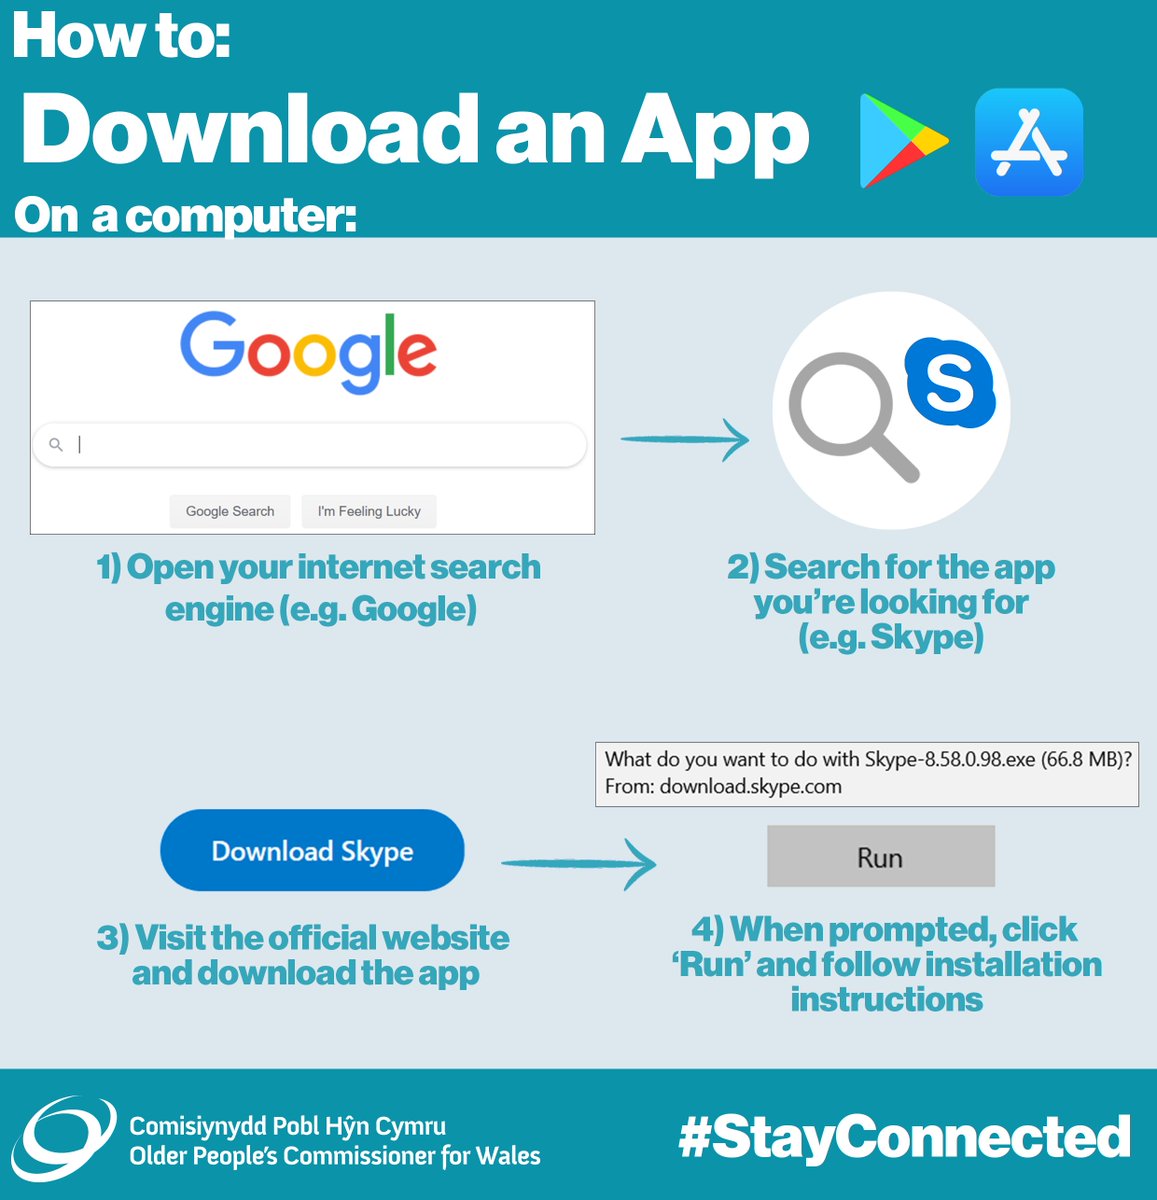 Take a look at our simple guide on how to download apps like Skype and WhatsApp onto your computer/mobile phone to help make sure you have everything you need to  #StayConnected during isolation: